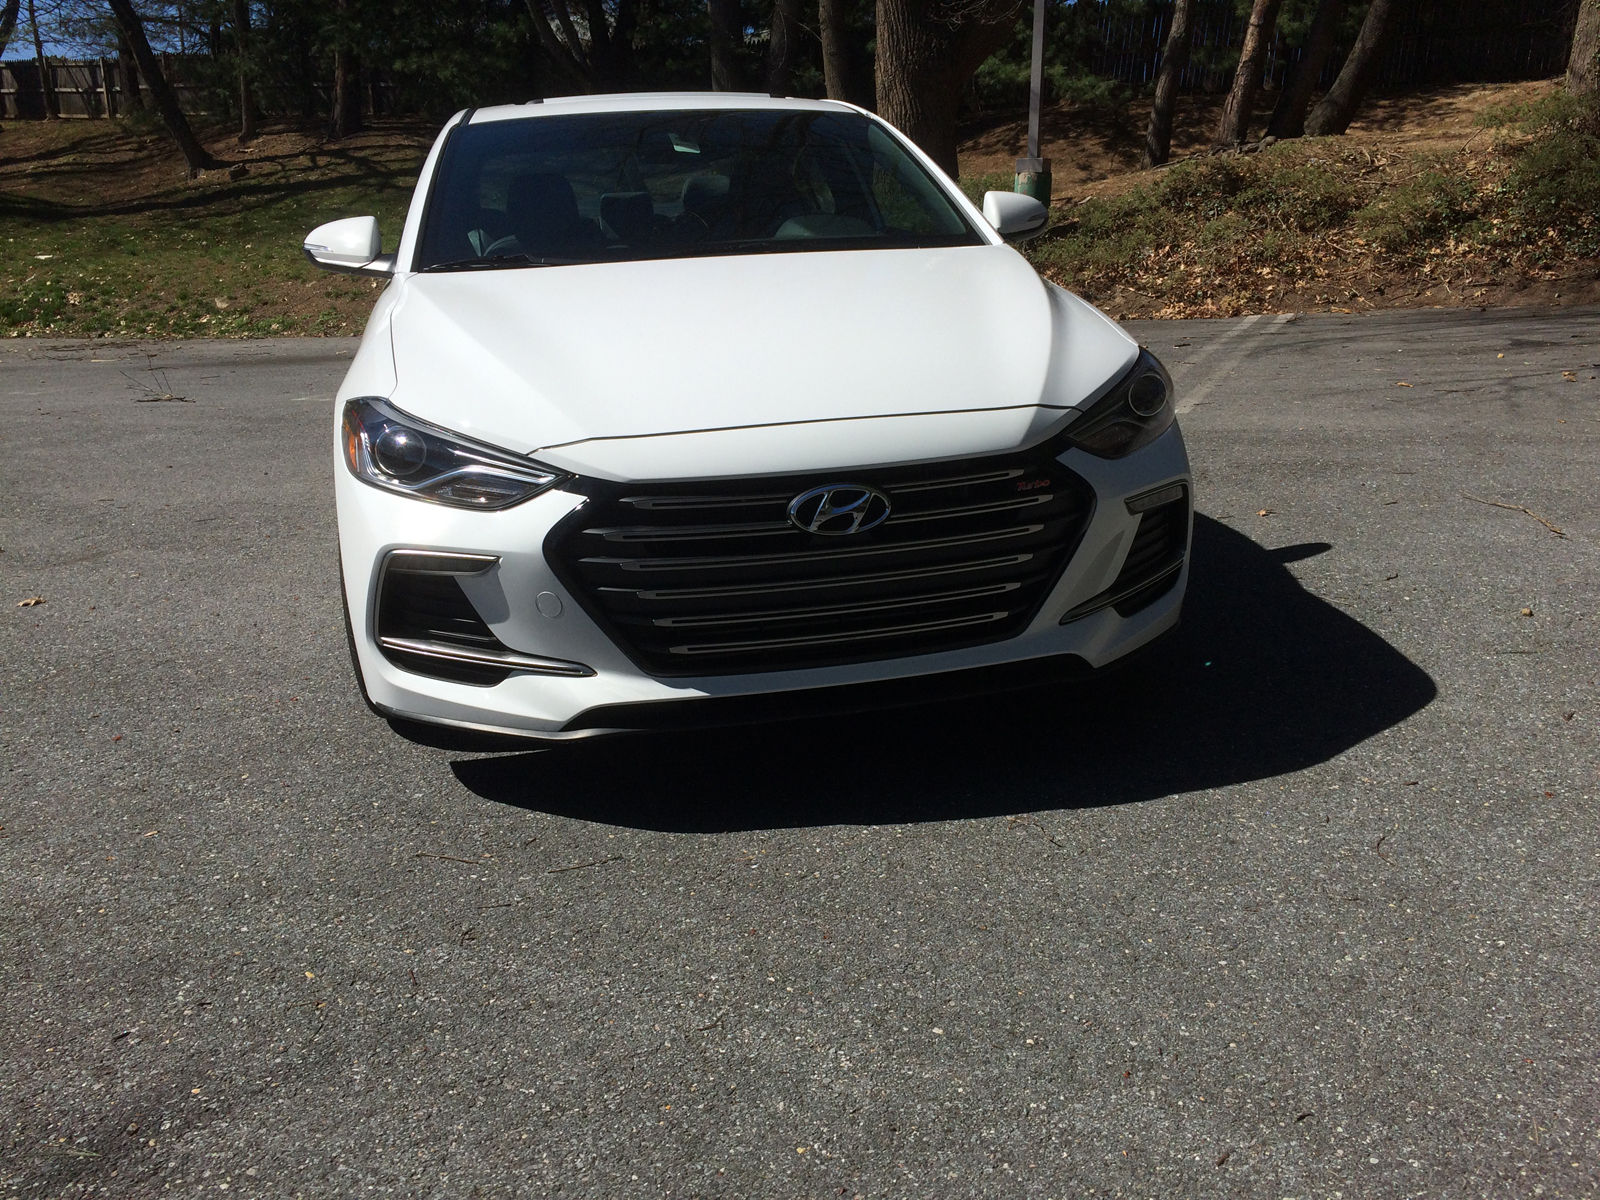 Hyundai is making a big name for itself by selling cars with many features buyers want at a seemingly reasonable price. The compact sports sedan is no exception. (WTOP/Mike Parris)